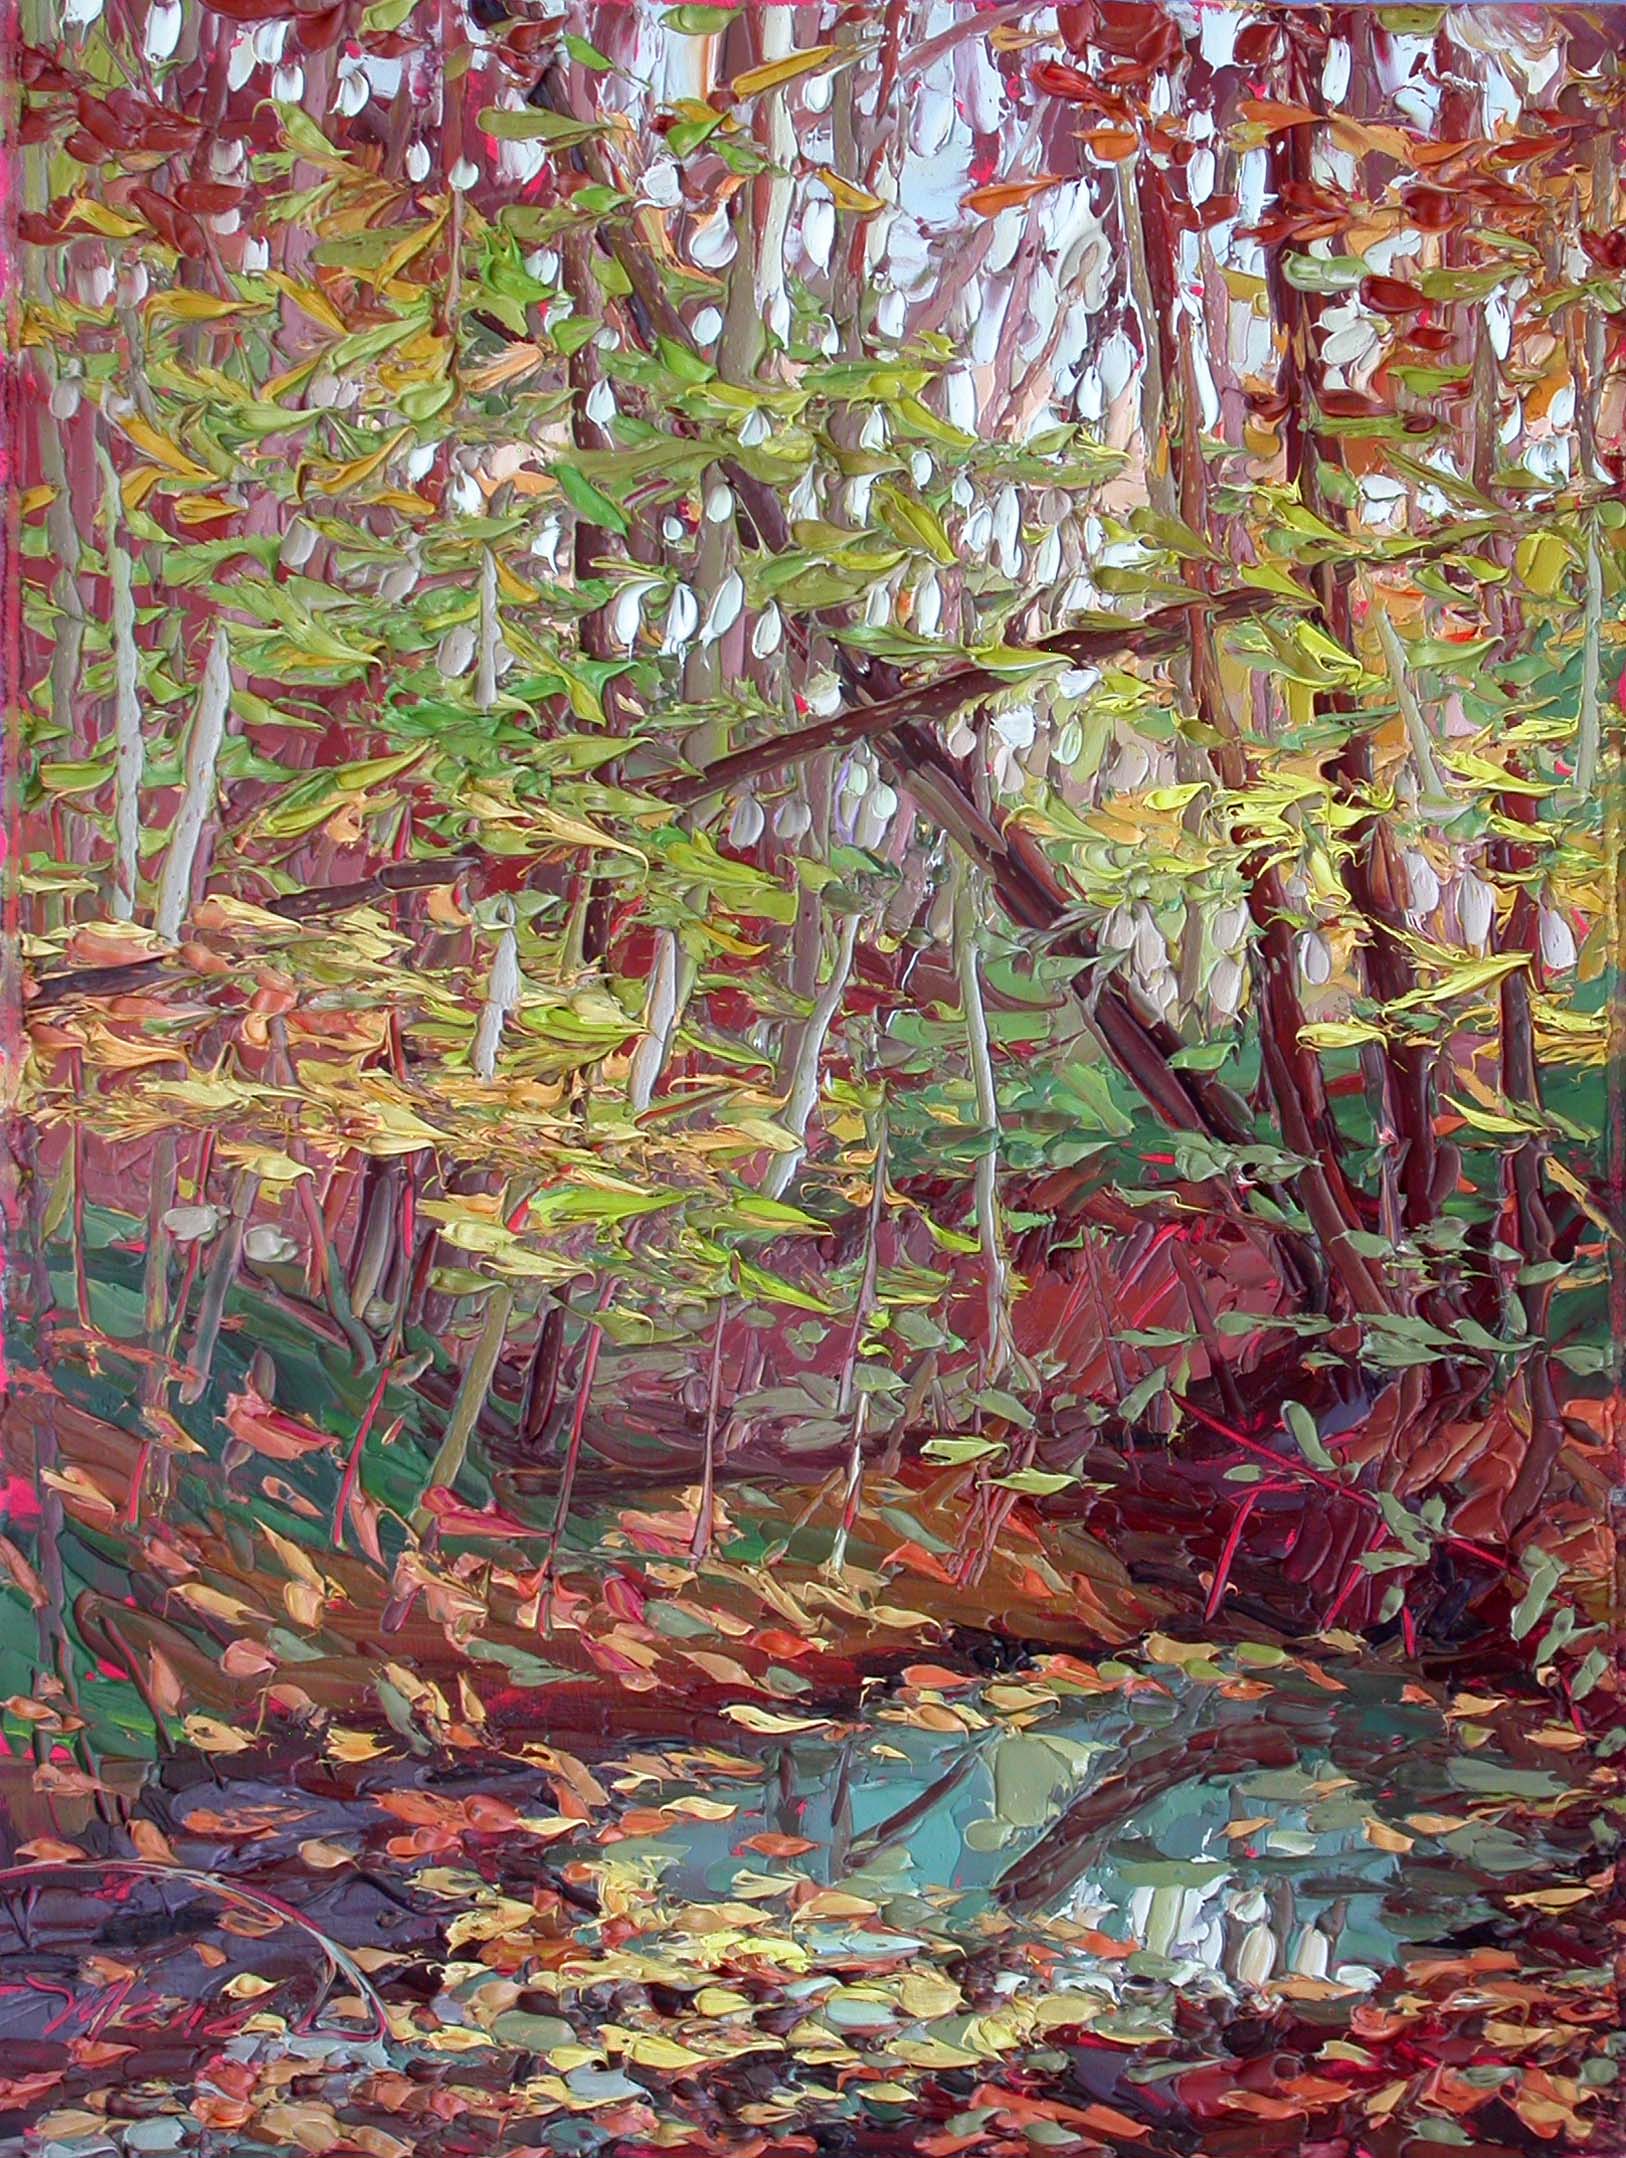 Turquoise Creek, October 24, 2016, 16" x 12" plein air oil painting done on location in Yellowwood State Forest, by Charlene Marsh.